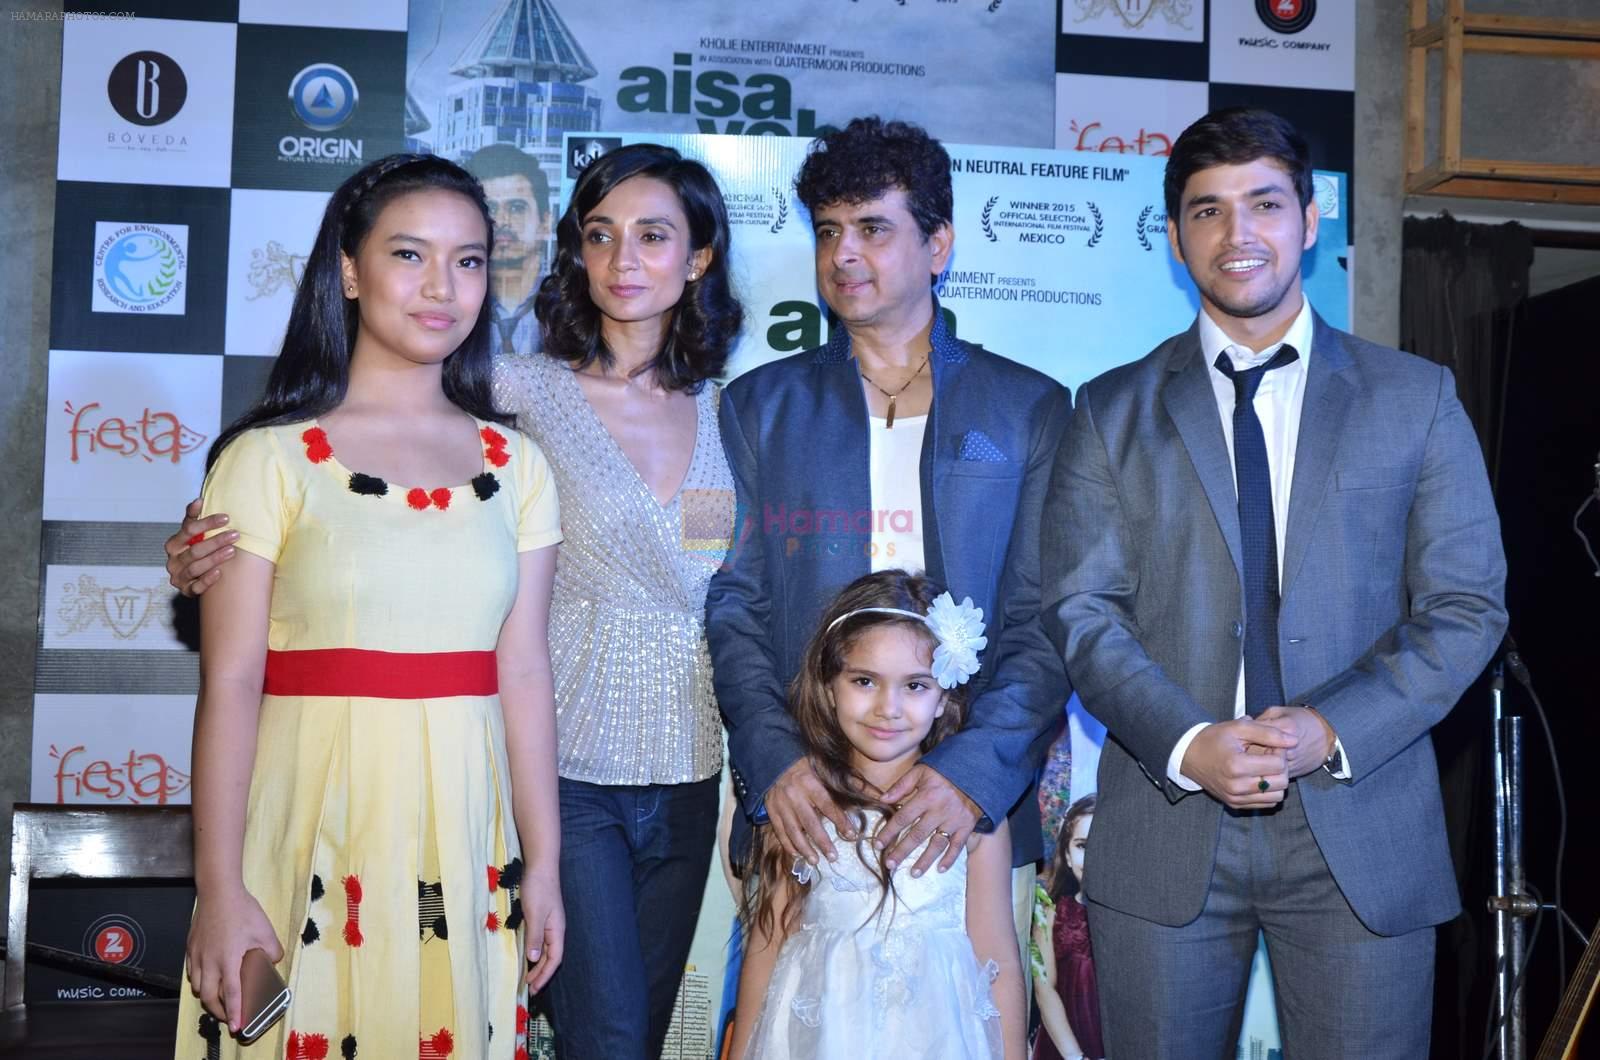 Ira Dubey at Aisa Yeh Jahaan trailor launch in Mumbai on 30th June 2015